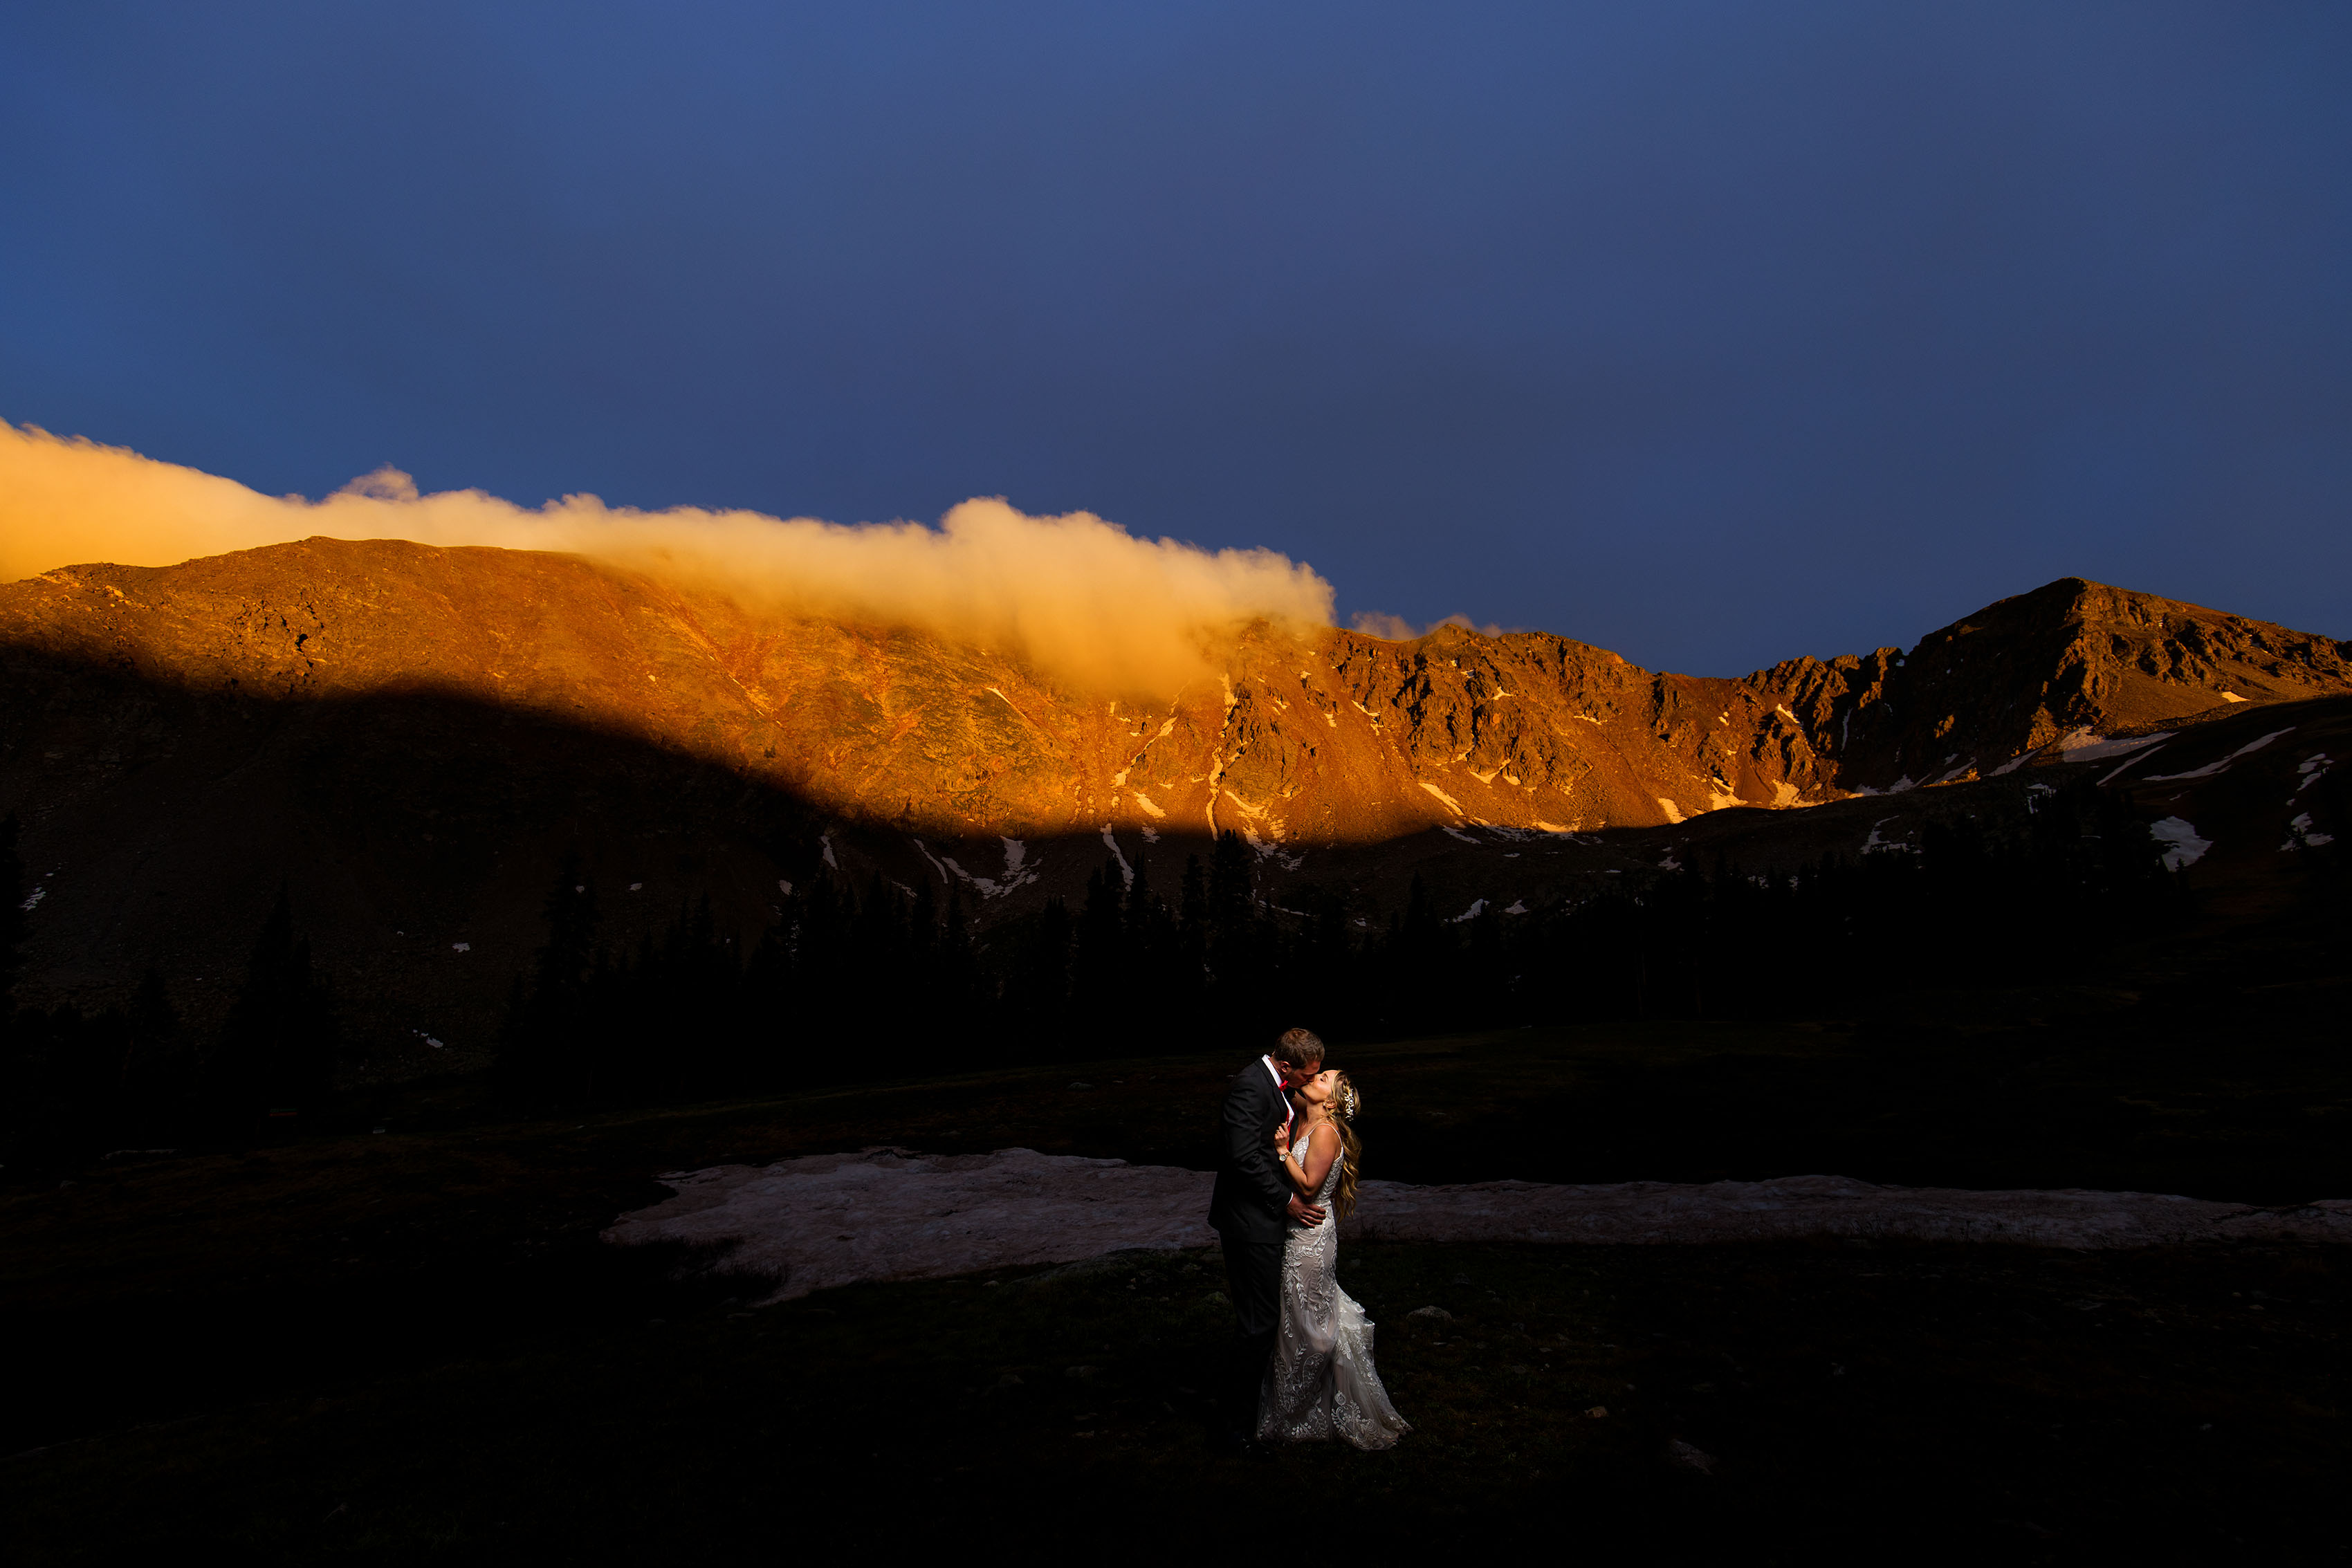 The newlyweds shares a kiss as the East wall at Arapahoe Basin is illuminated with alpenglow